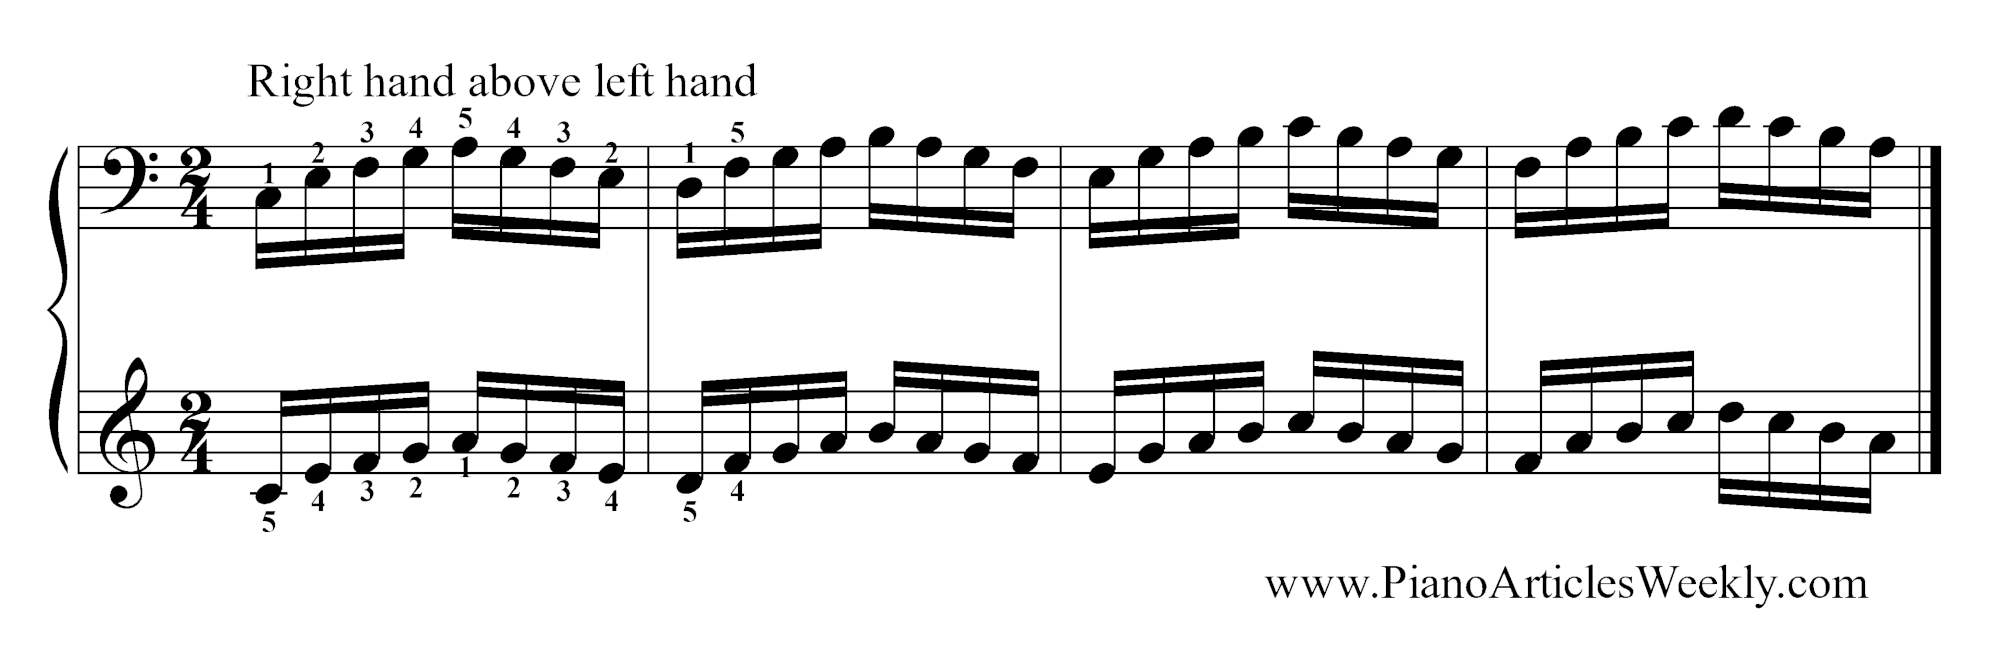 Hanon Exercise right hand above left hand